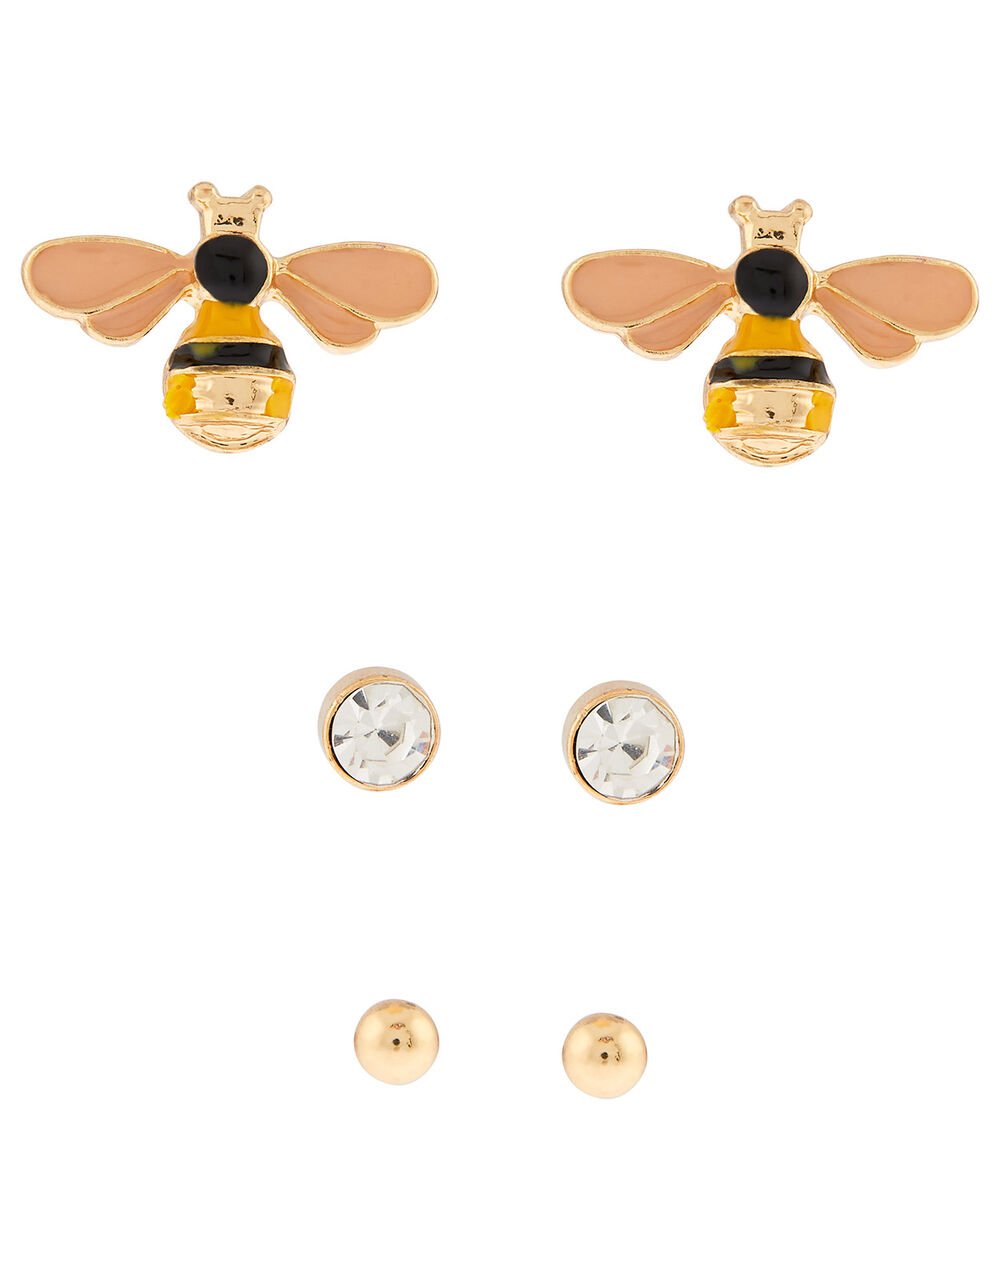 Bee, Crystal and Ball Stud Earring Set, , large